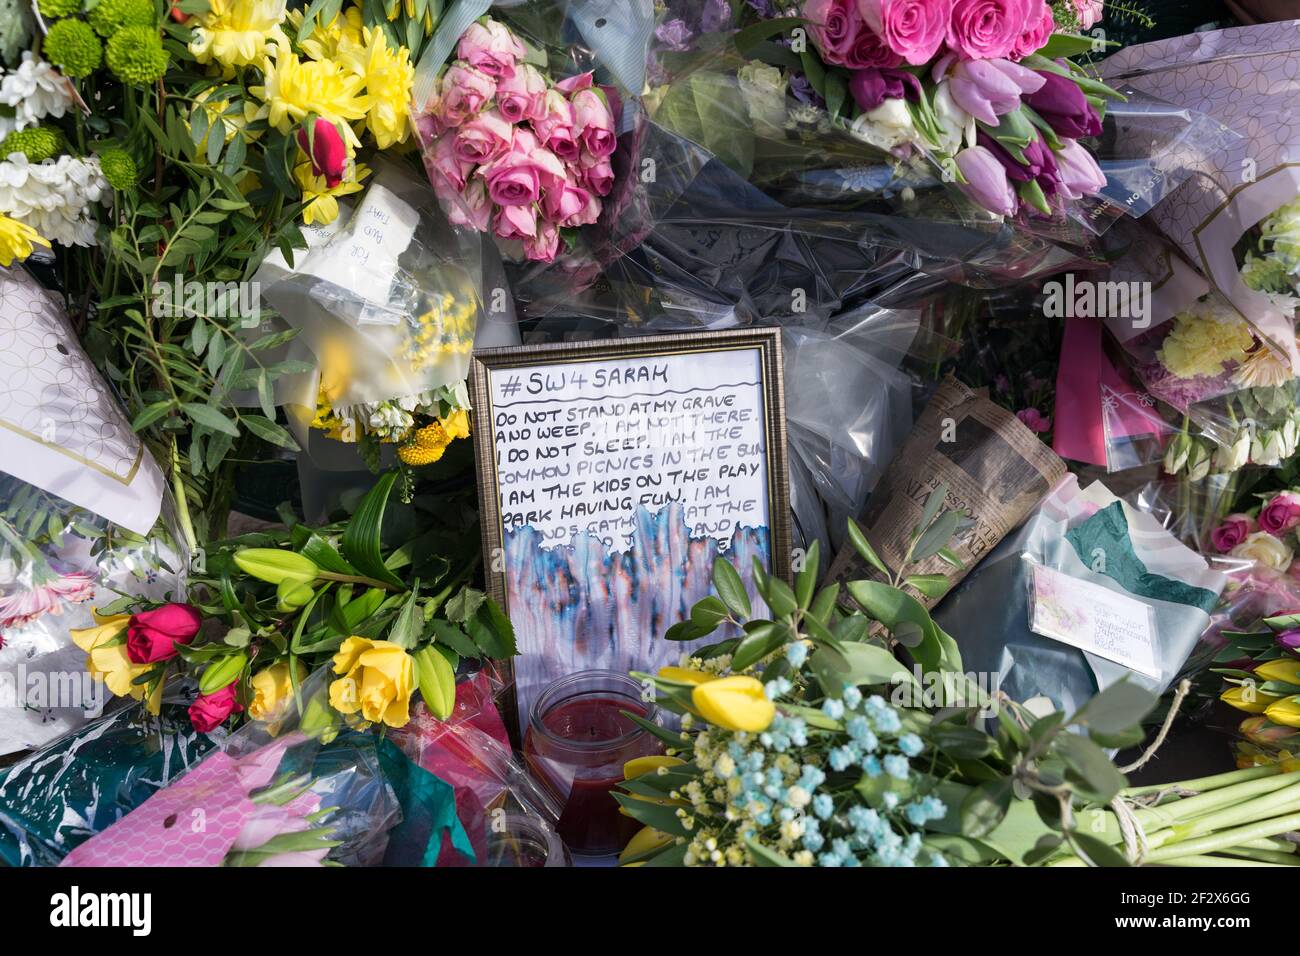 floral tributes at Clapham Common bandstand in memory of Sarah Everard, kidnaped and murdered , London, England Stock Photo